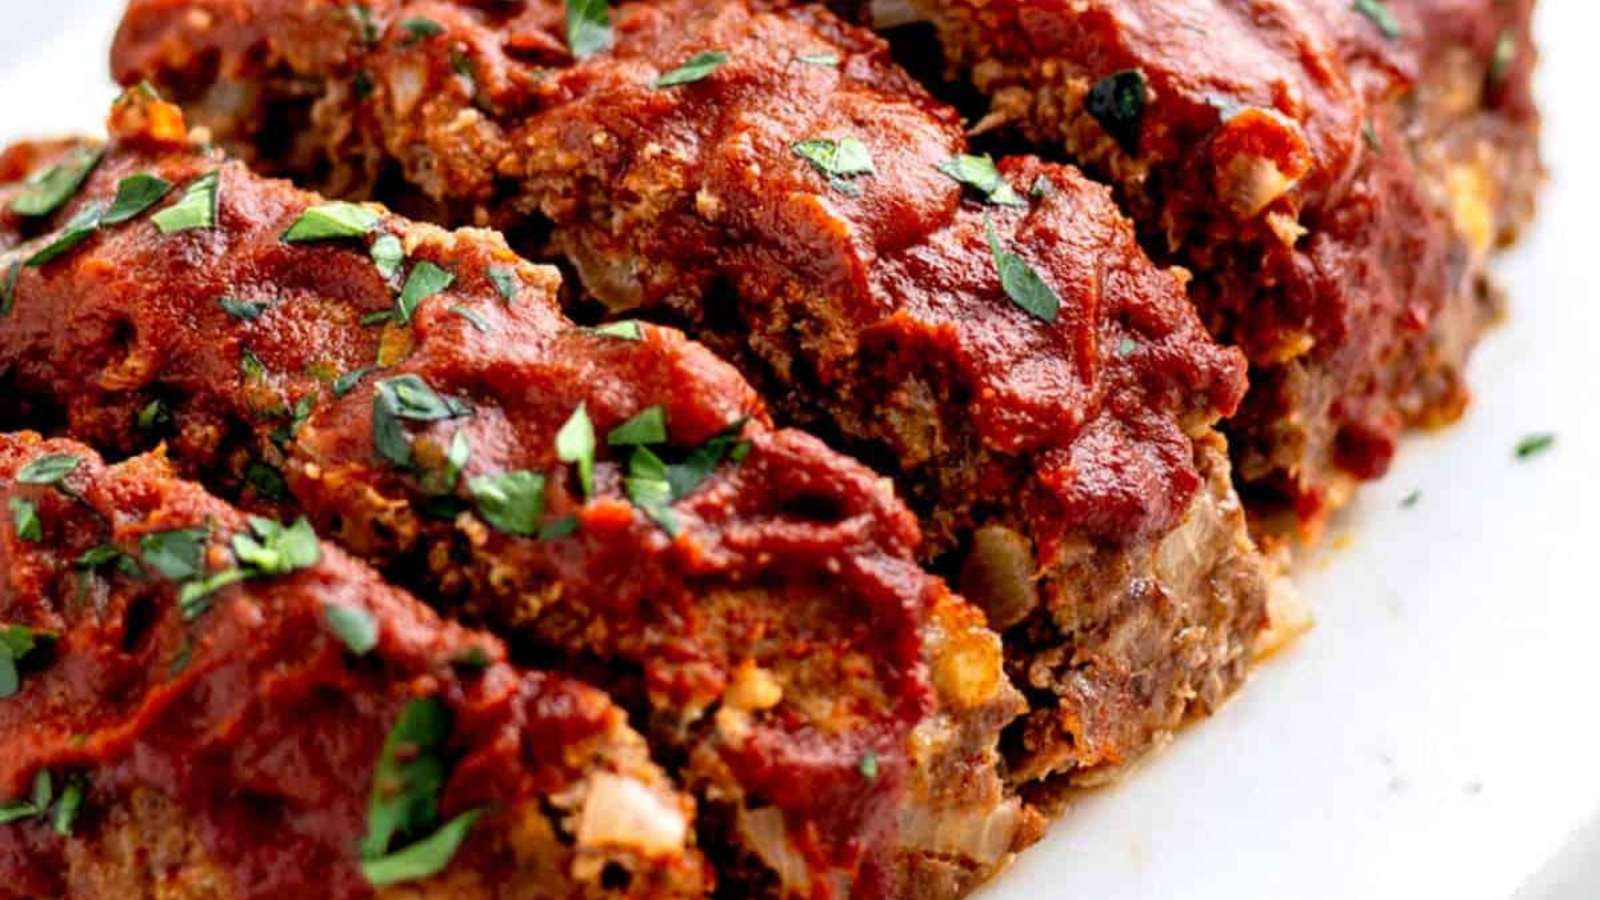 Meatloaf with sauce on a white plate.